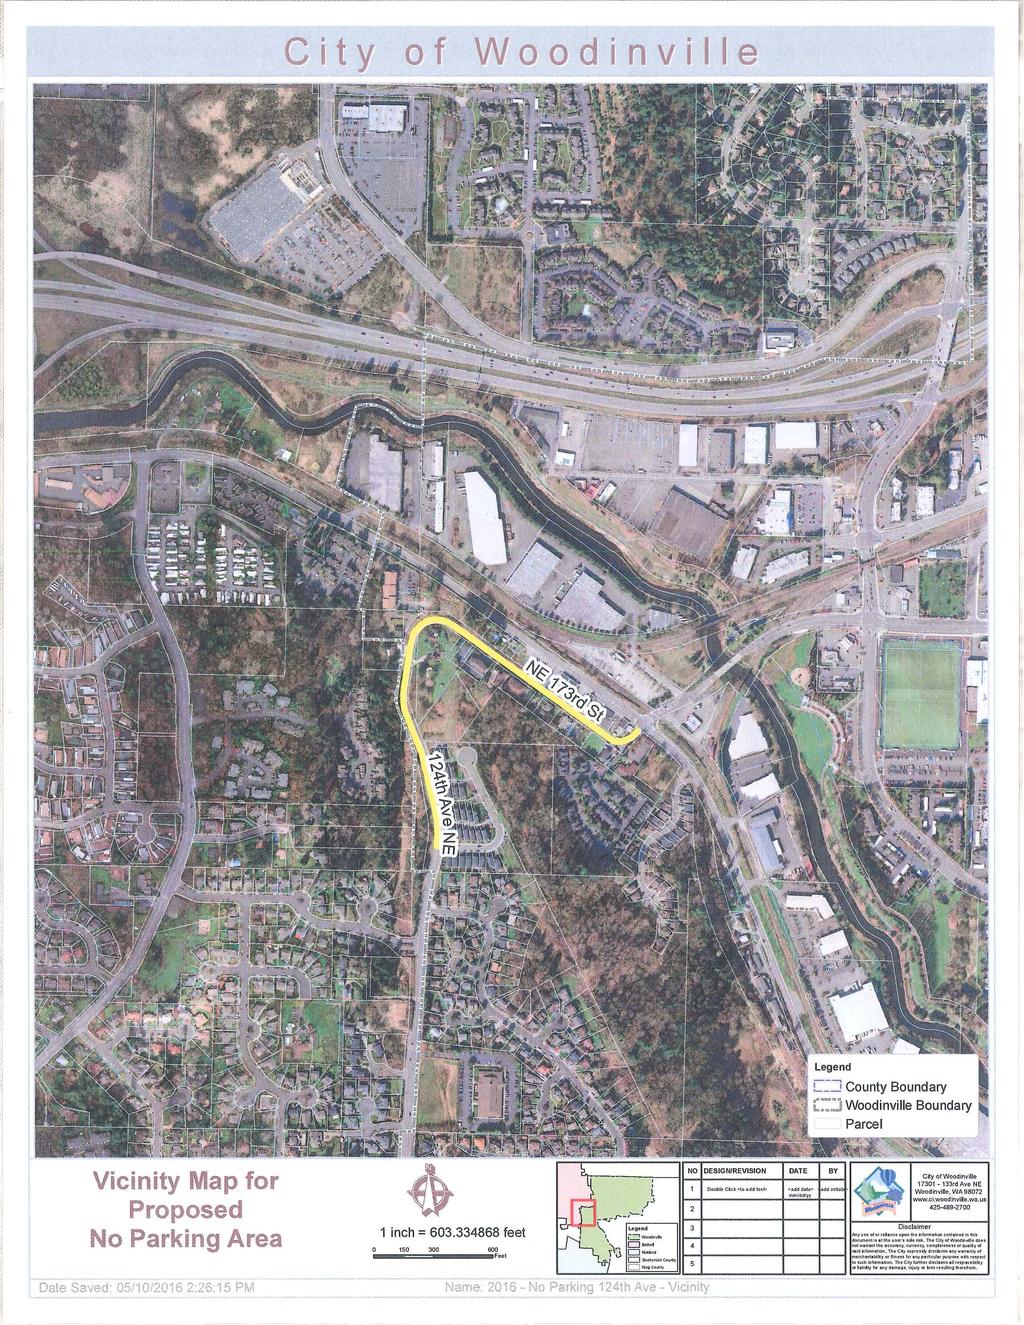 -------1 City of Woodinville Vicinity Map for Proposed No Parking Area Date Saved 05/10/2016 2:2615 PM mm/ddl)"/ www.cf.woocllnvil e.wa.us 425-489-2700 1 inch= 603.